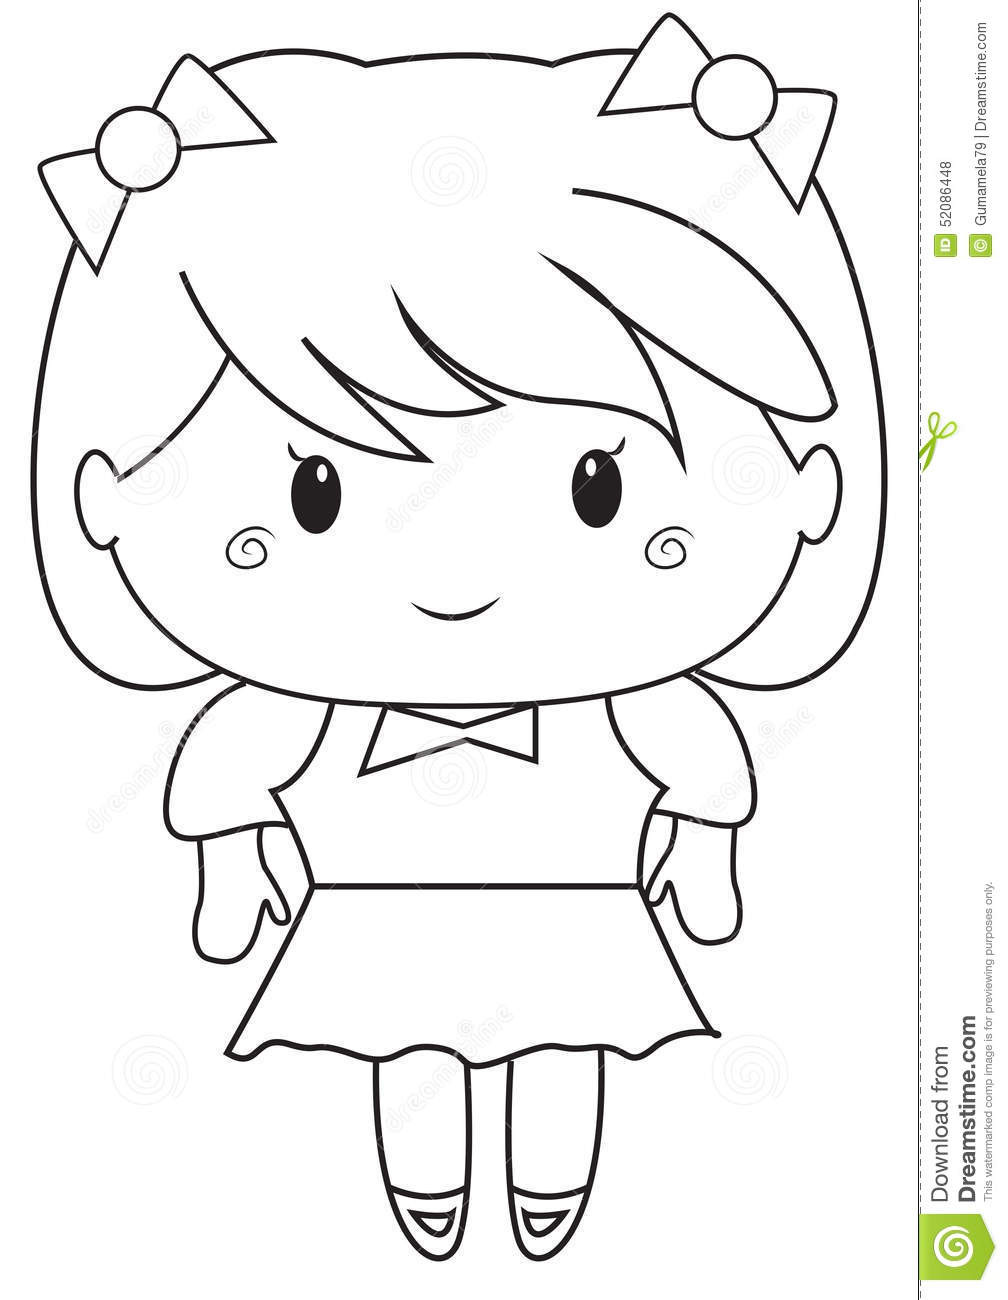 Coloring Pages For Little Girls
 Little girl coloring page stock illustration Illustration